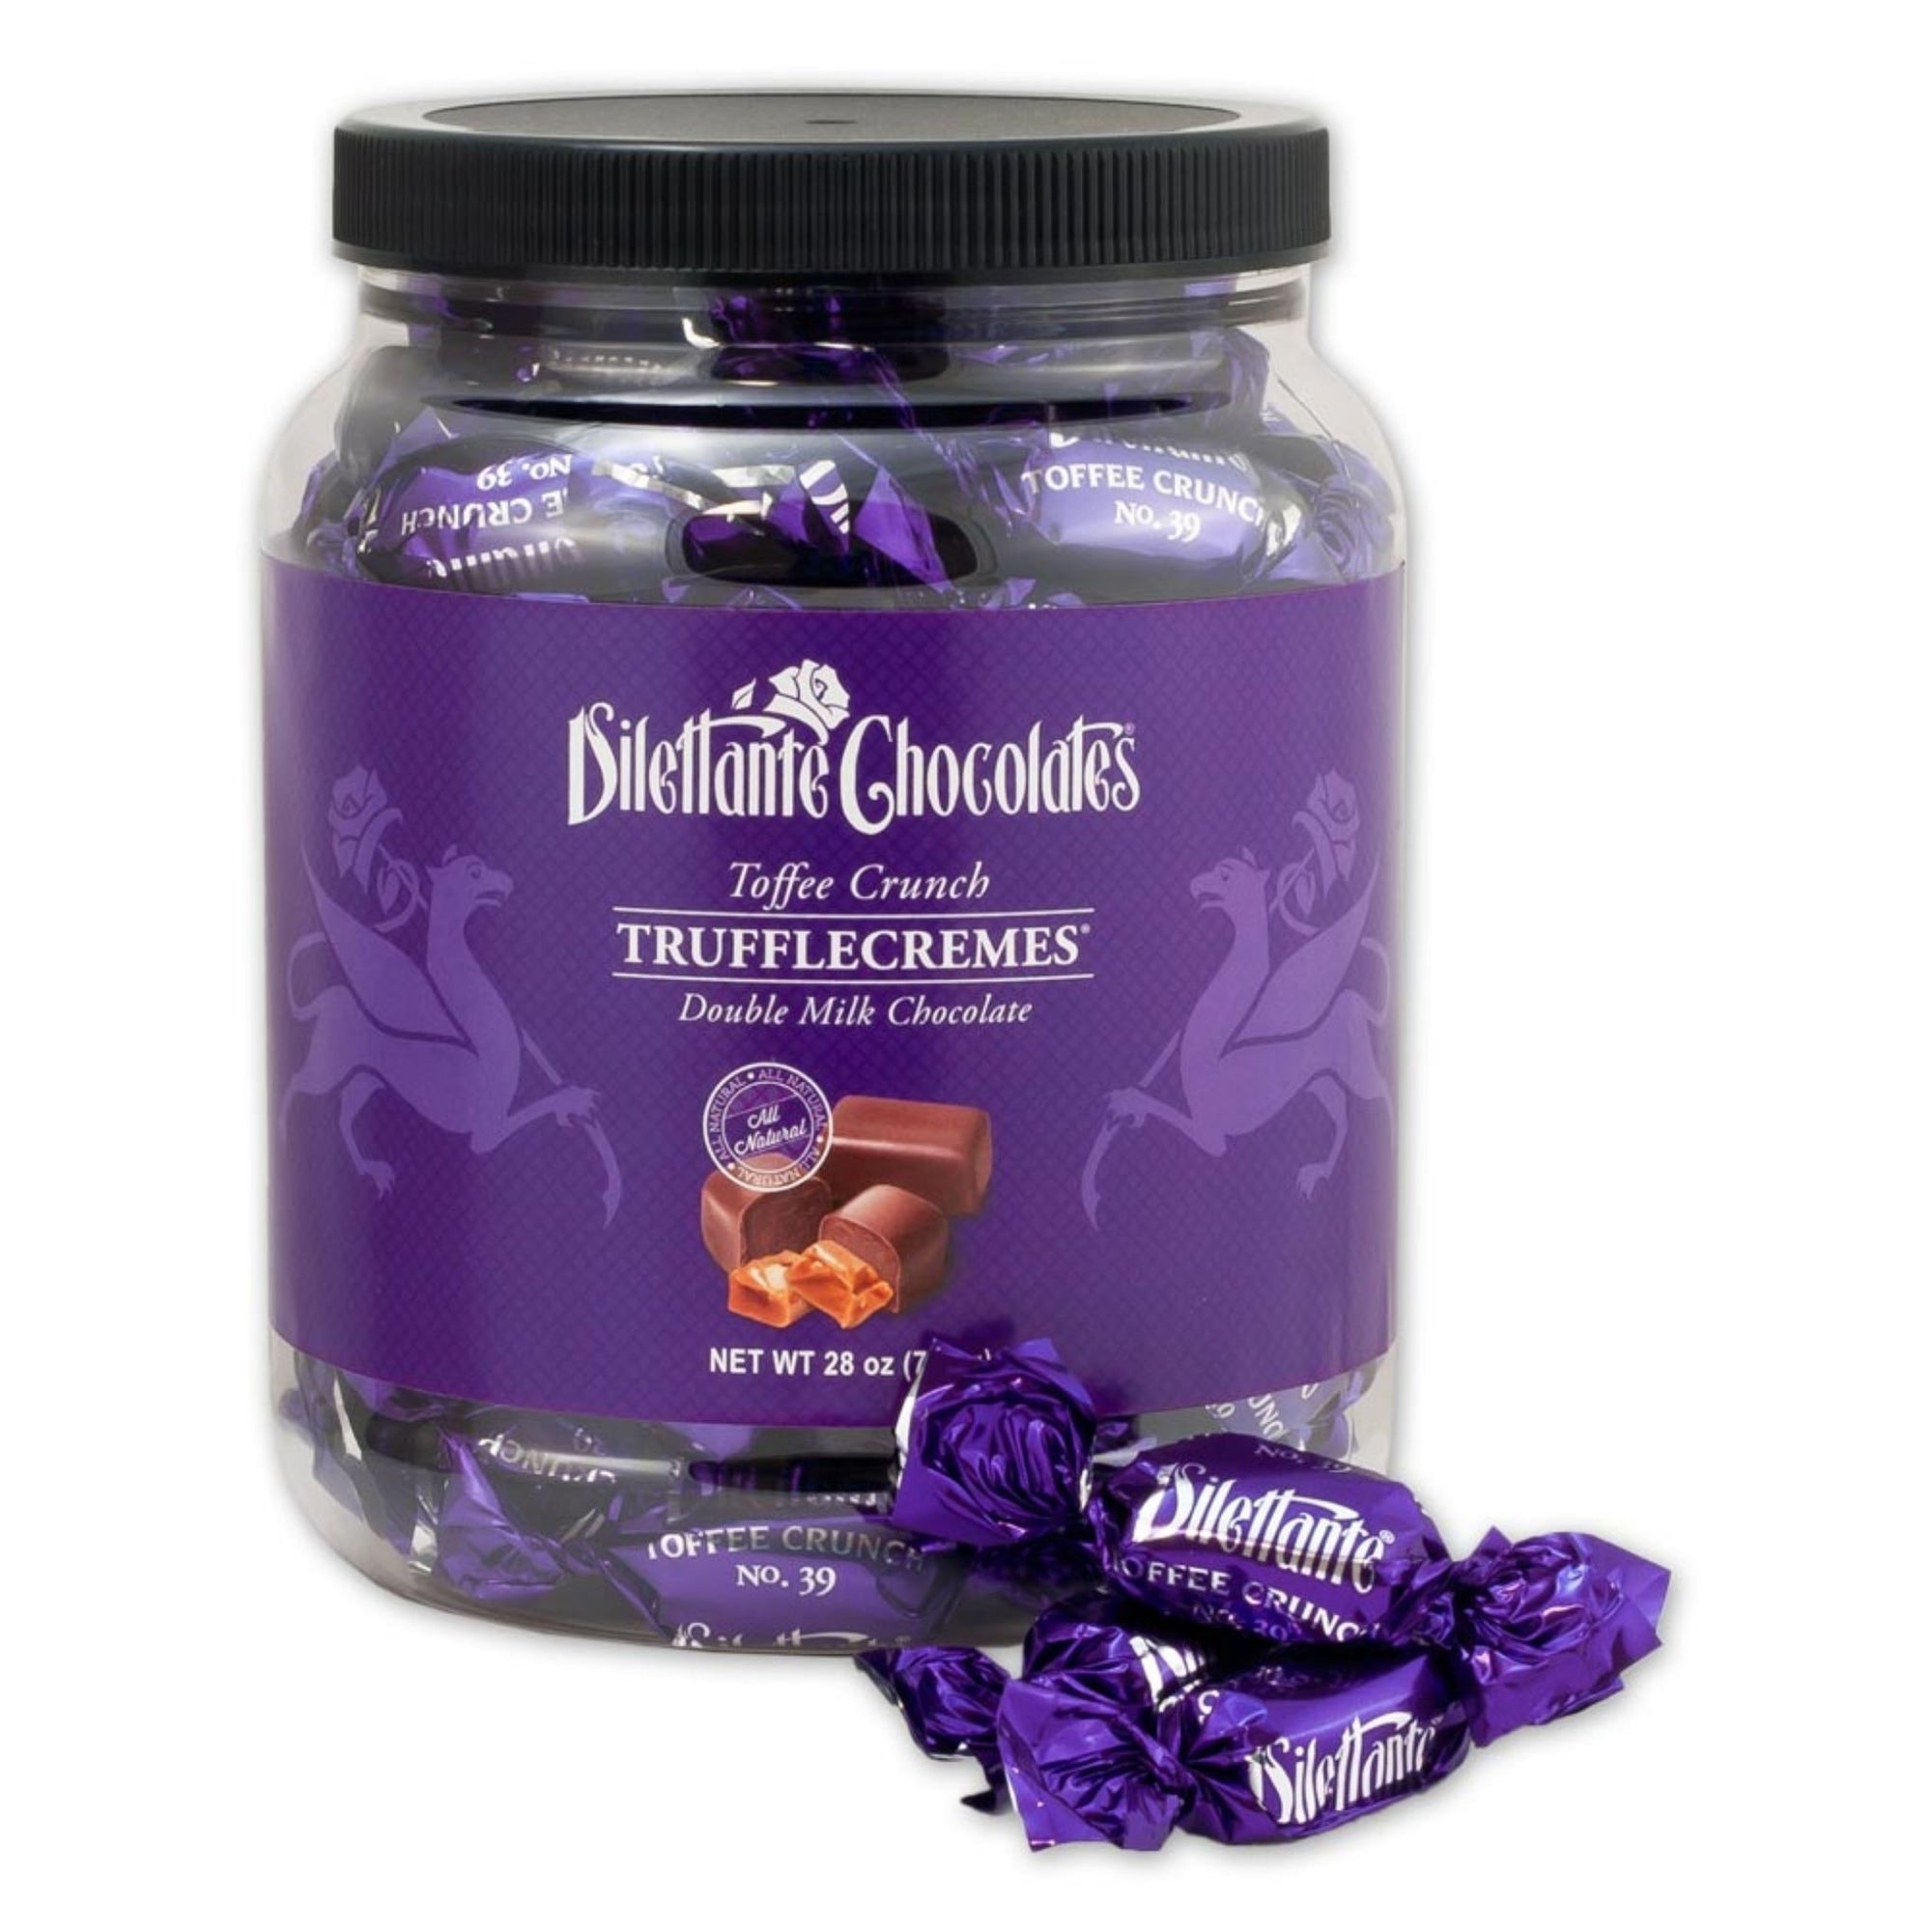 Dilettante Chocolates Toffee Crunch TruffleCremes Coated in Double Milk Chocolate and Made with All Natural Ingredients in a 28-Ounce Jar